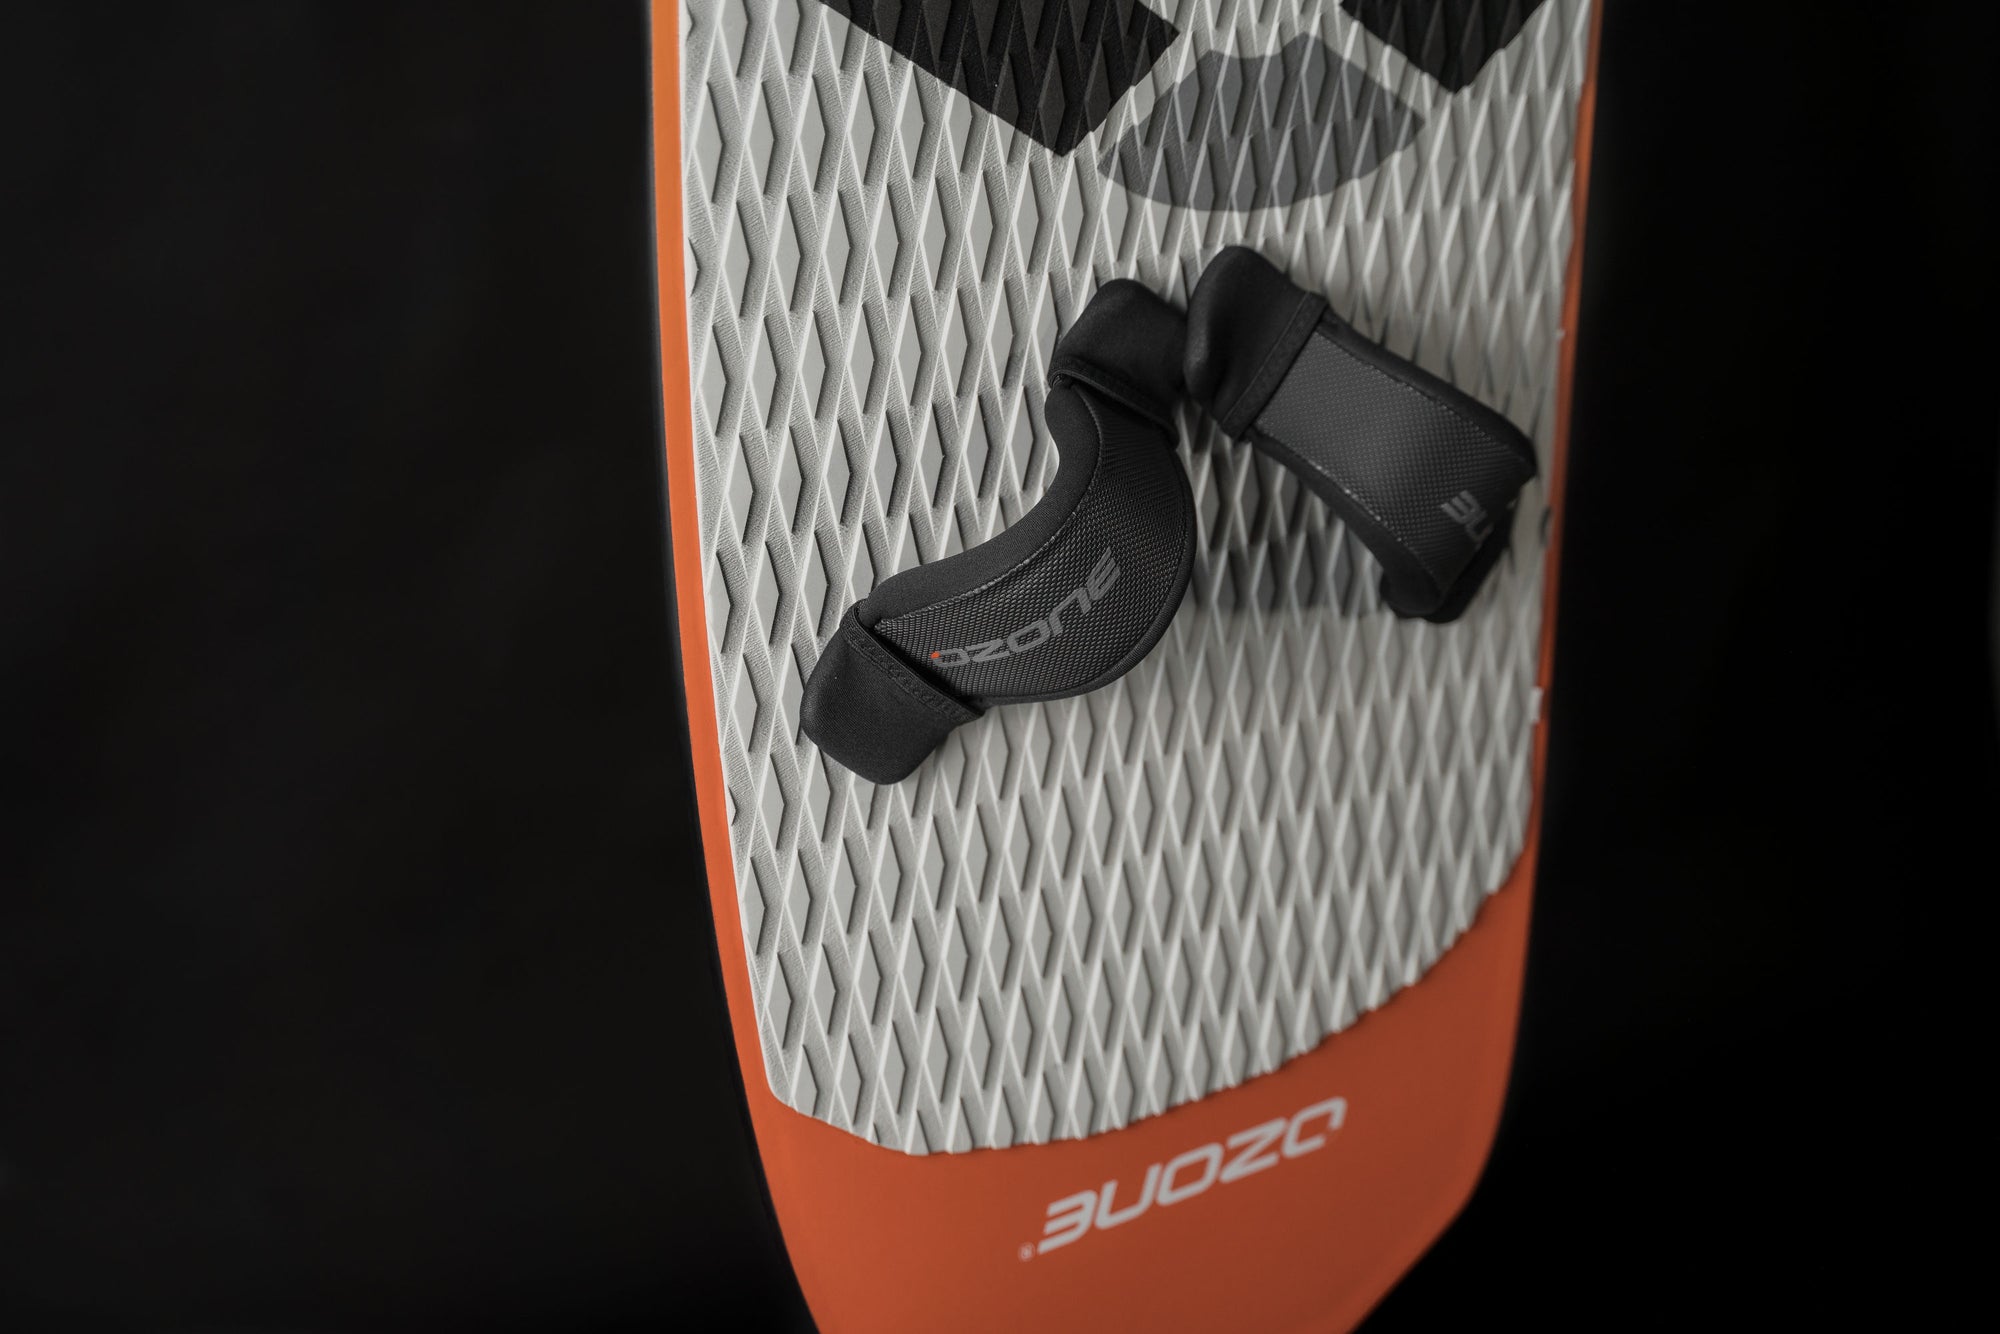 Ozone Apex V1 kitesurfing Board with straps on the board with a black background.